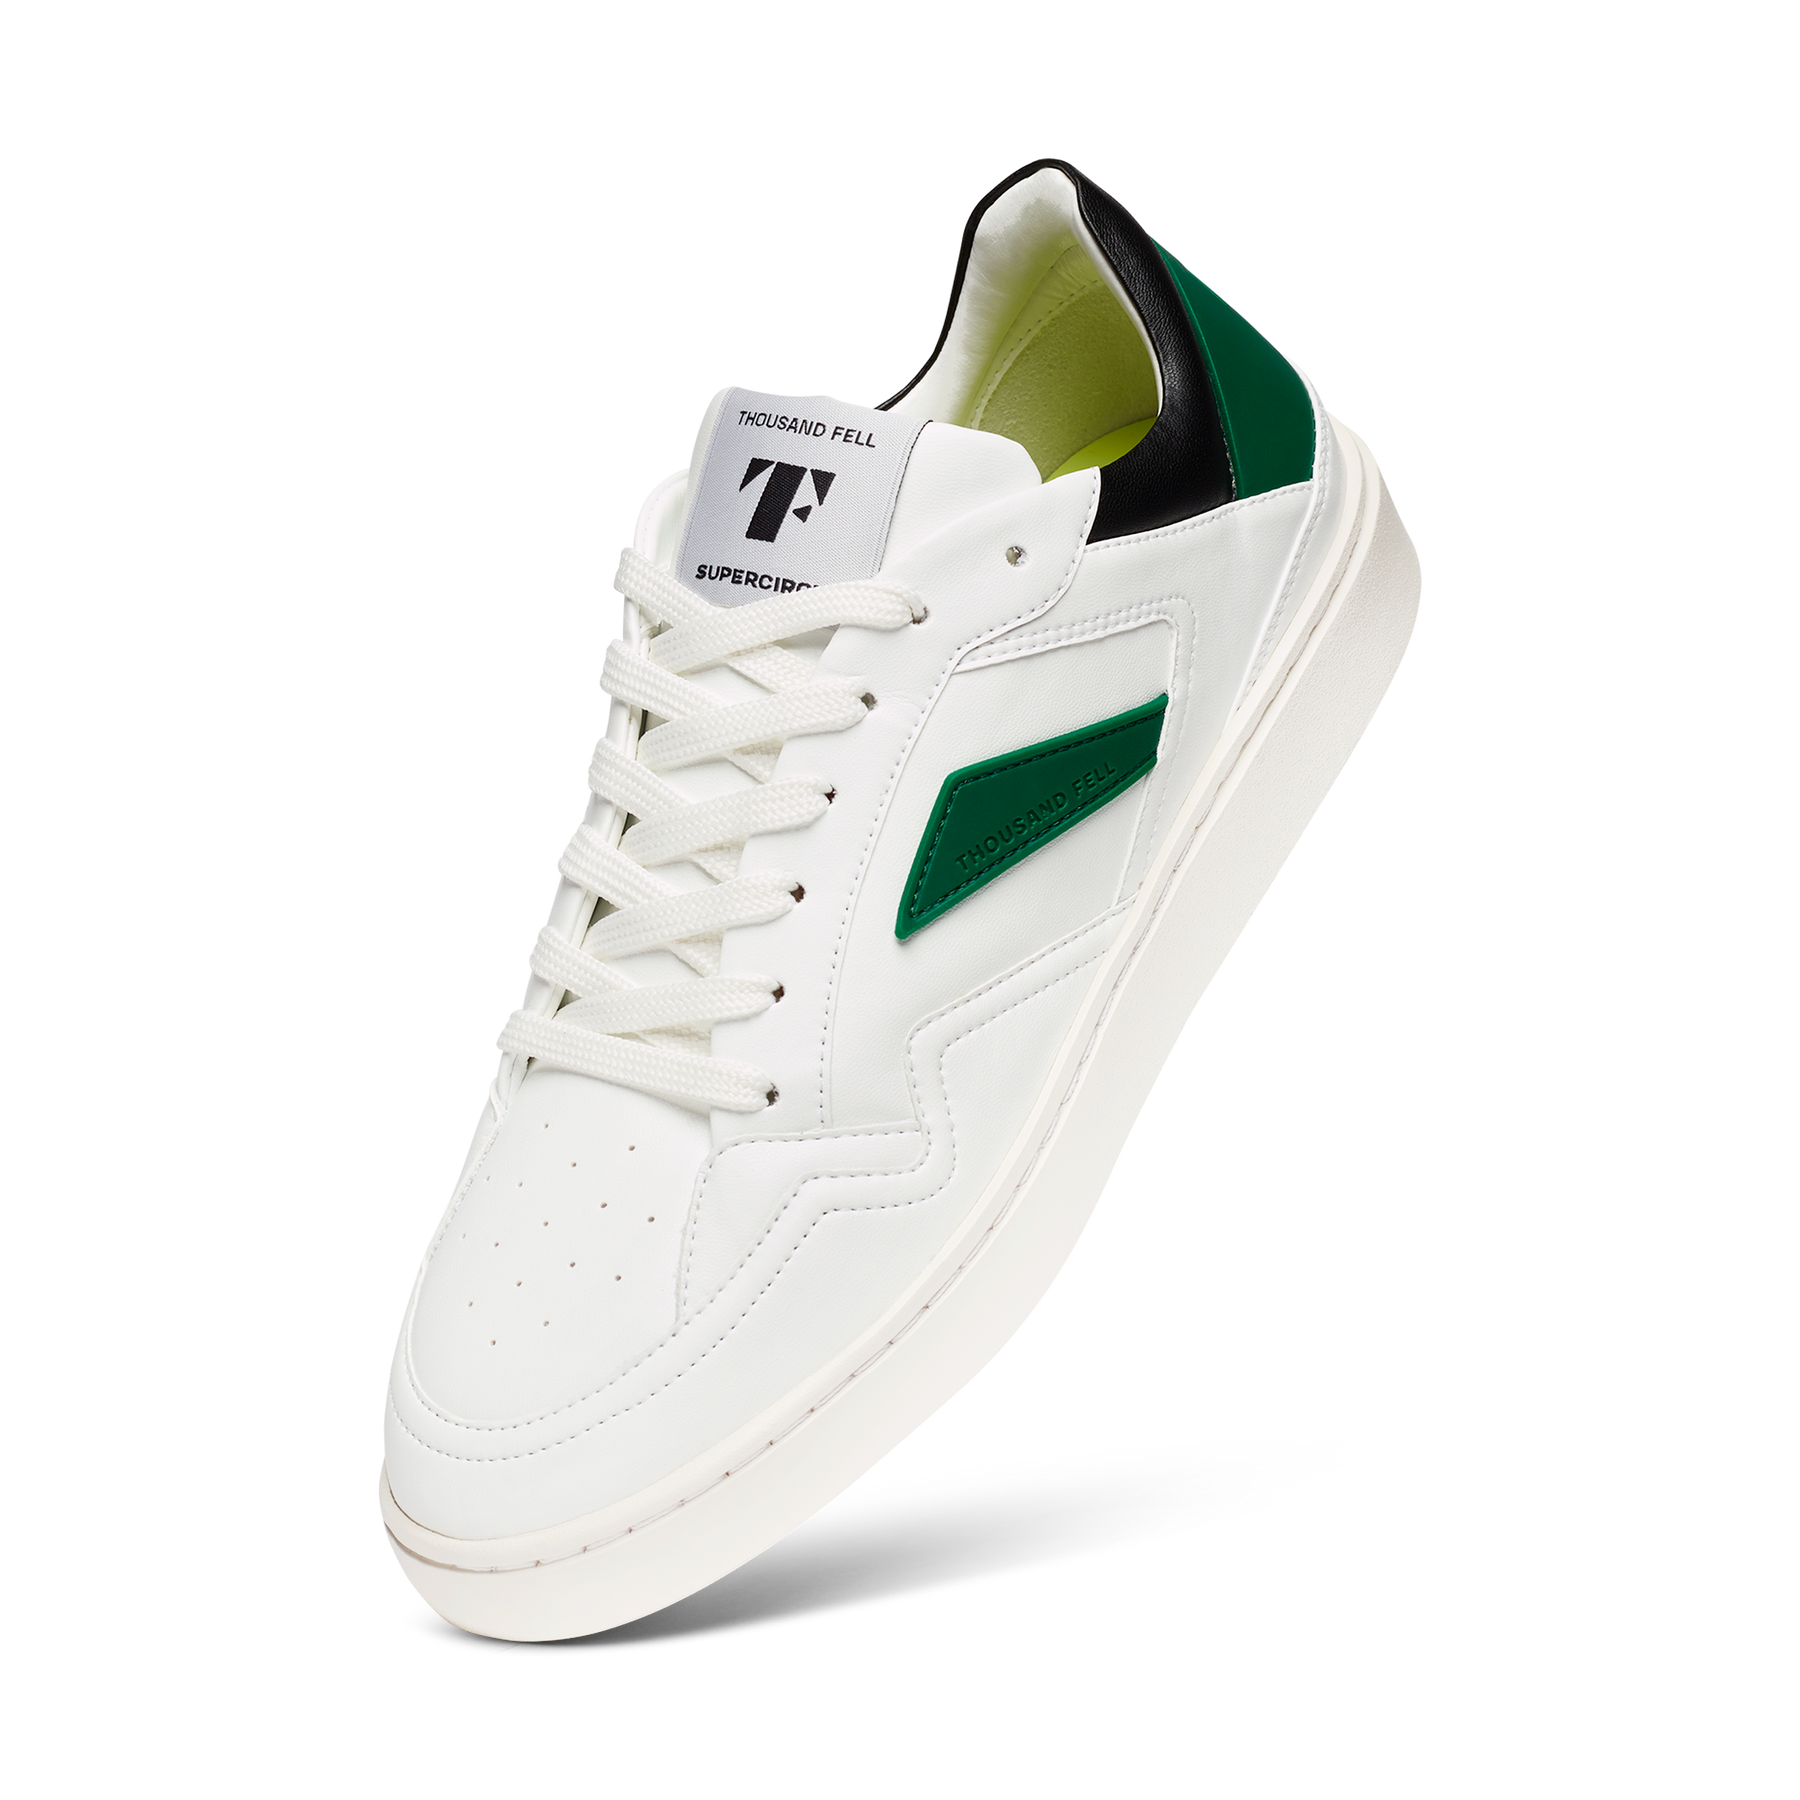 white eco friendly sneakers with black and green features